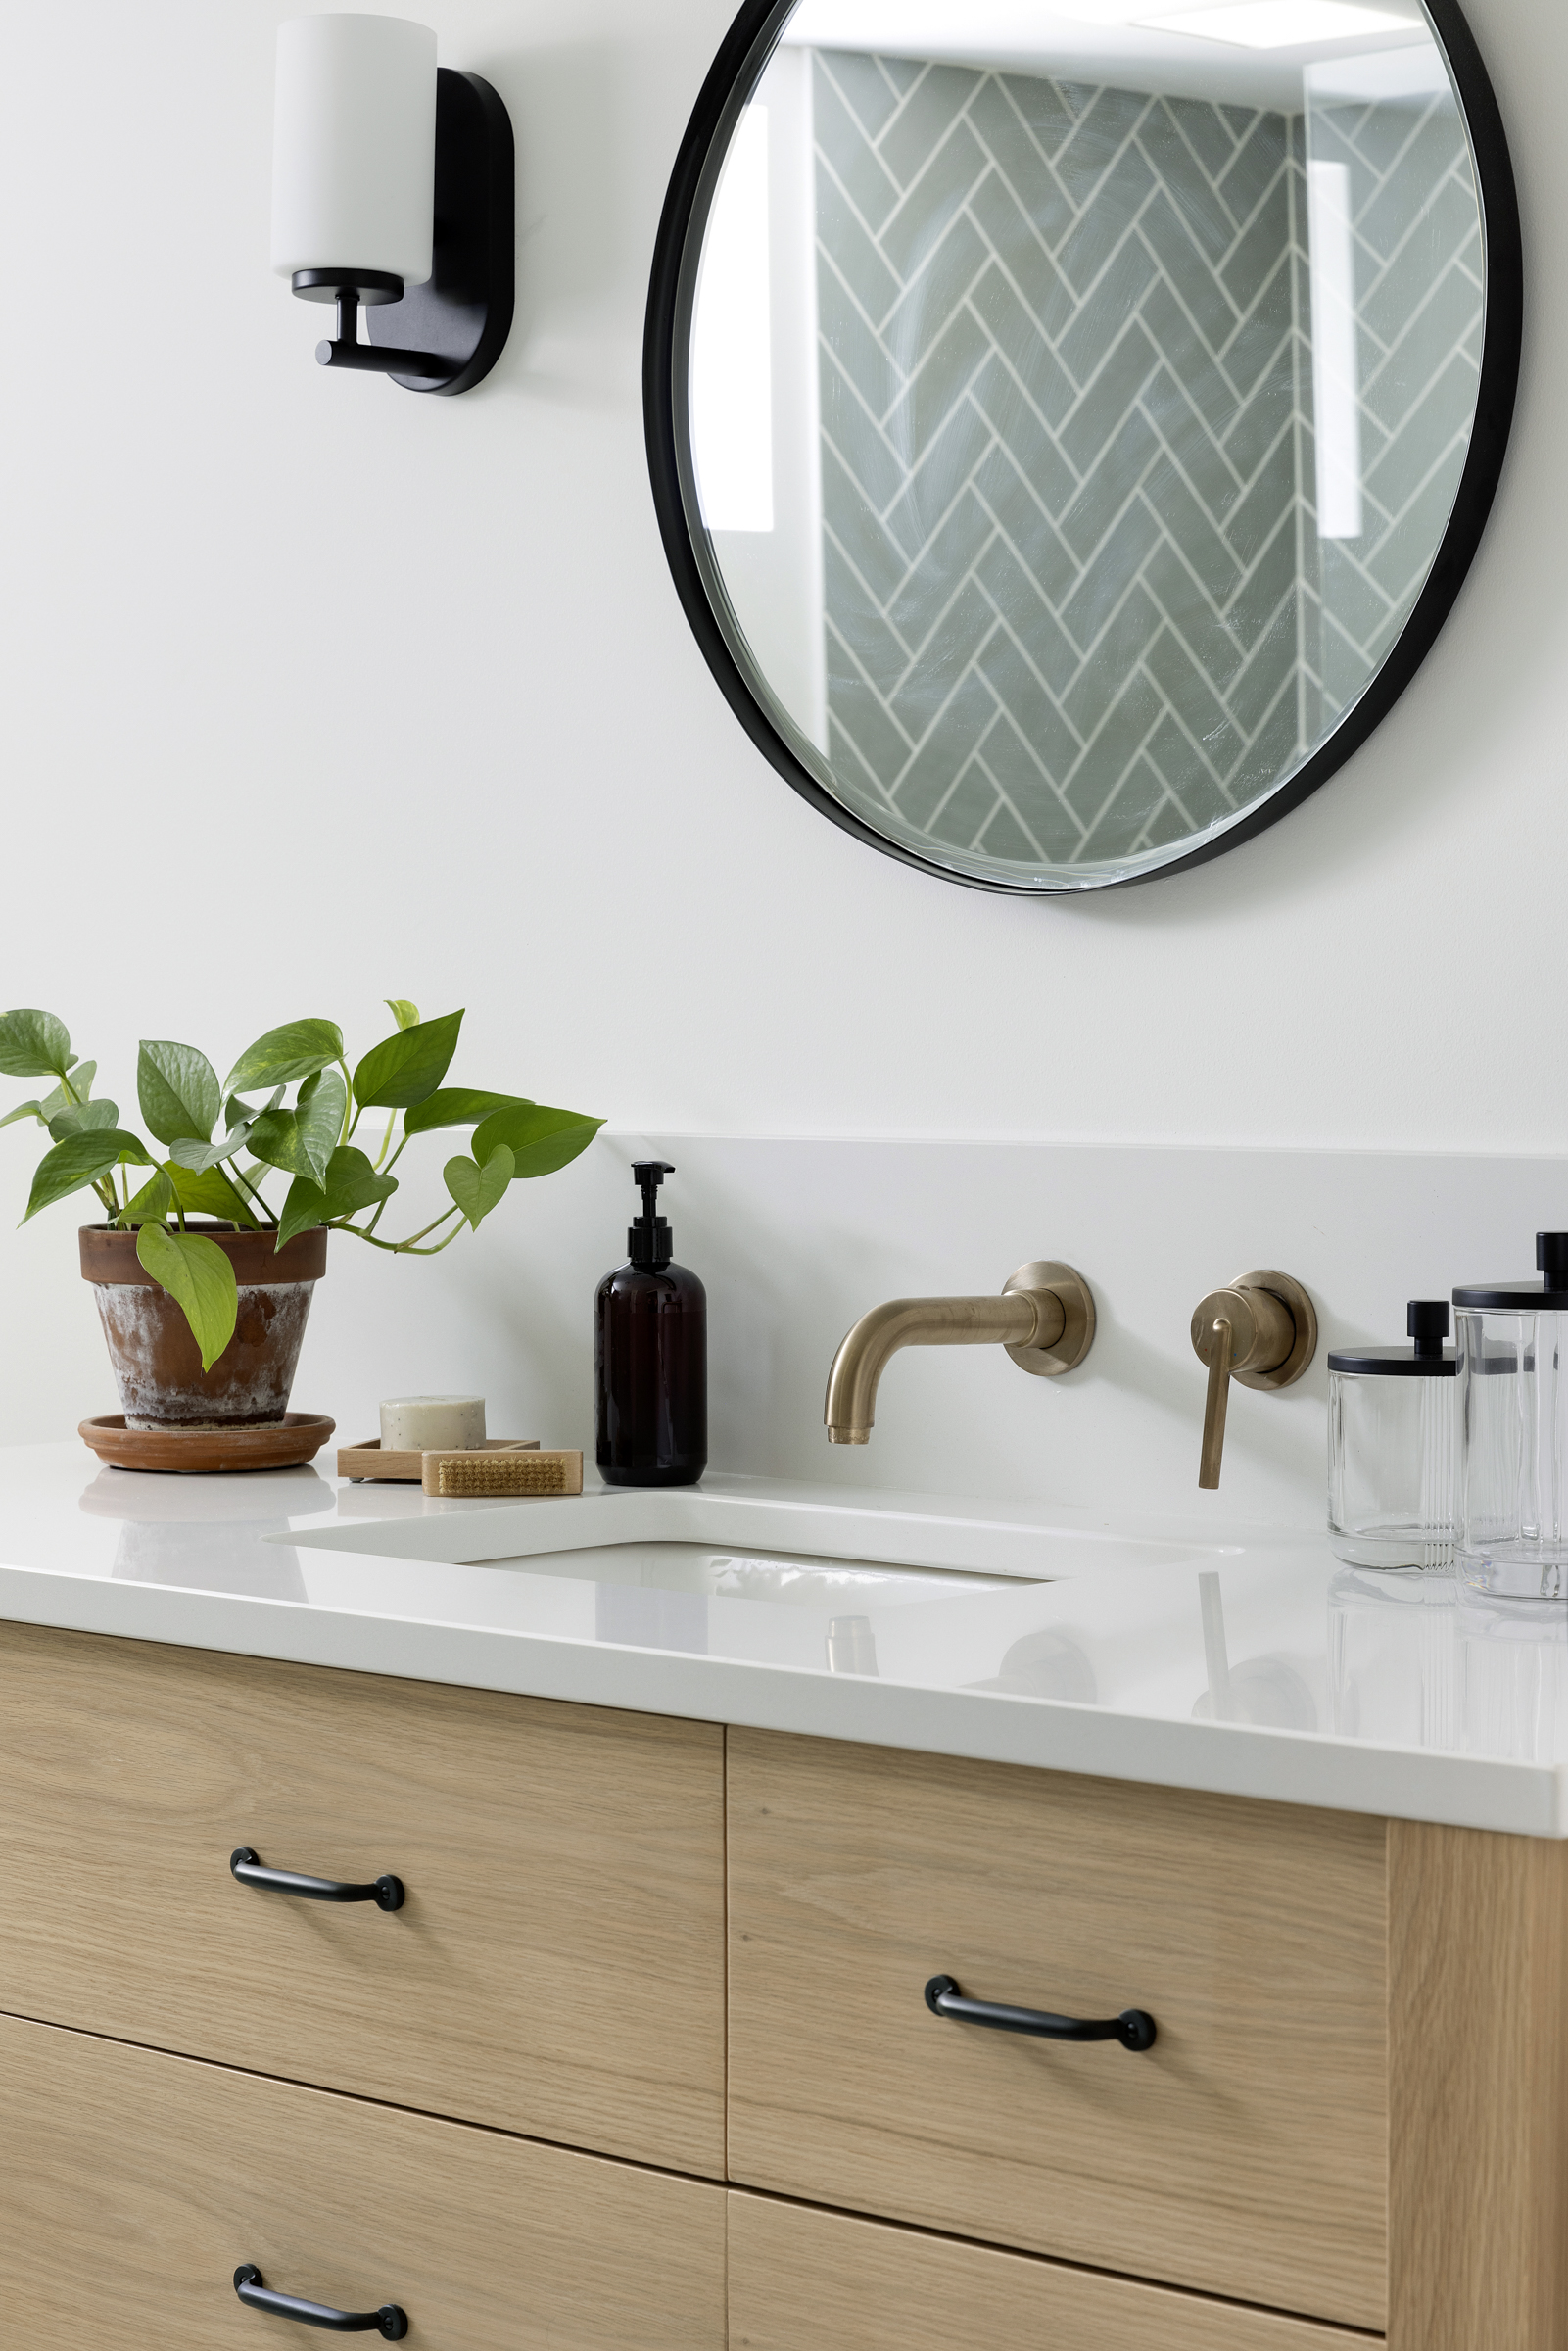 Twin Cities bathroom renovation with white oak Jkath Arden vanity and wall mounted faucet.